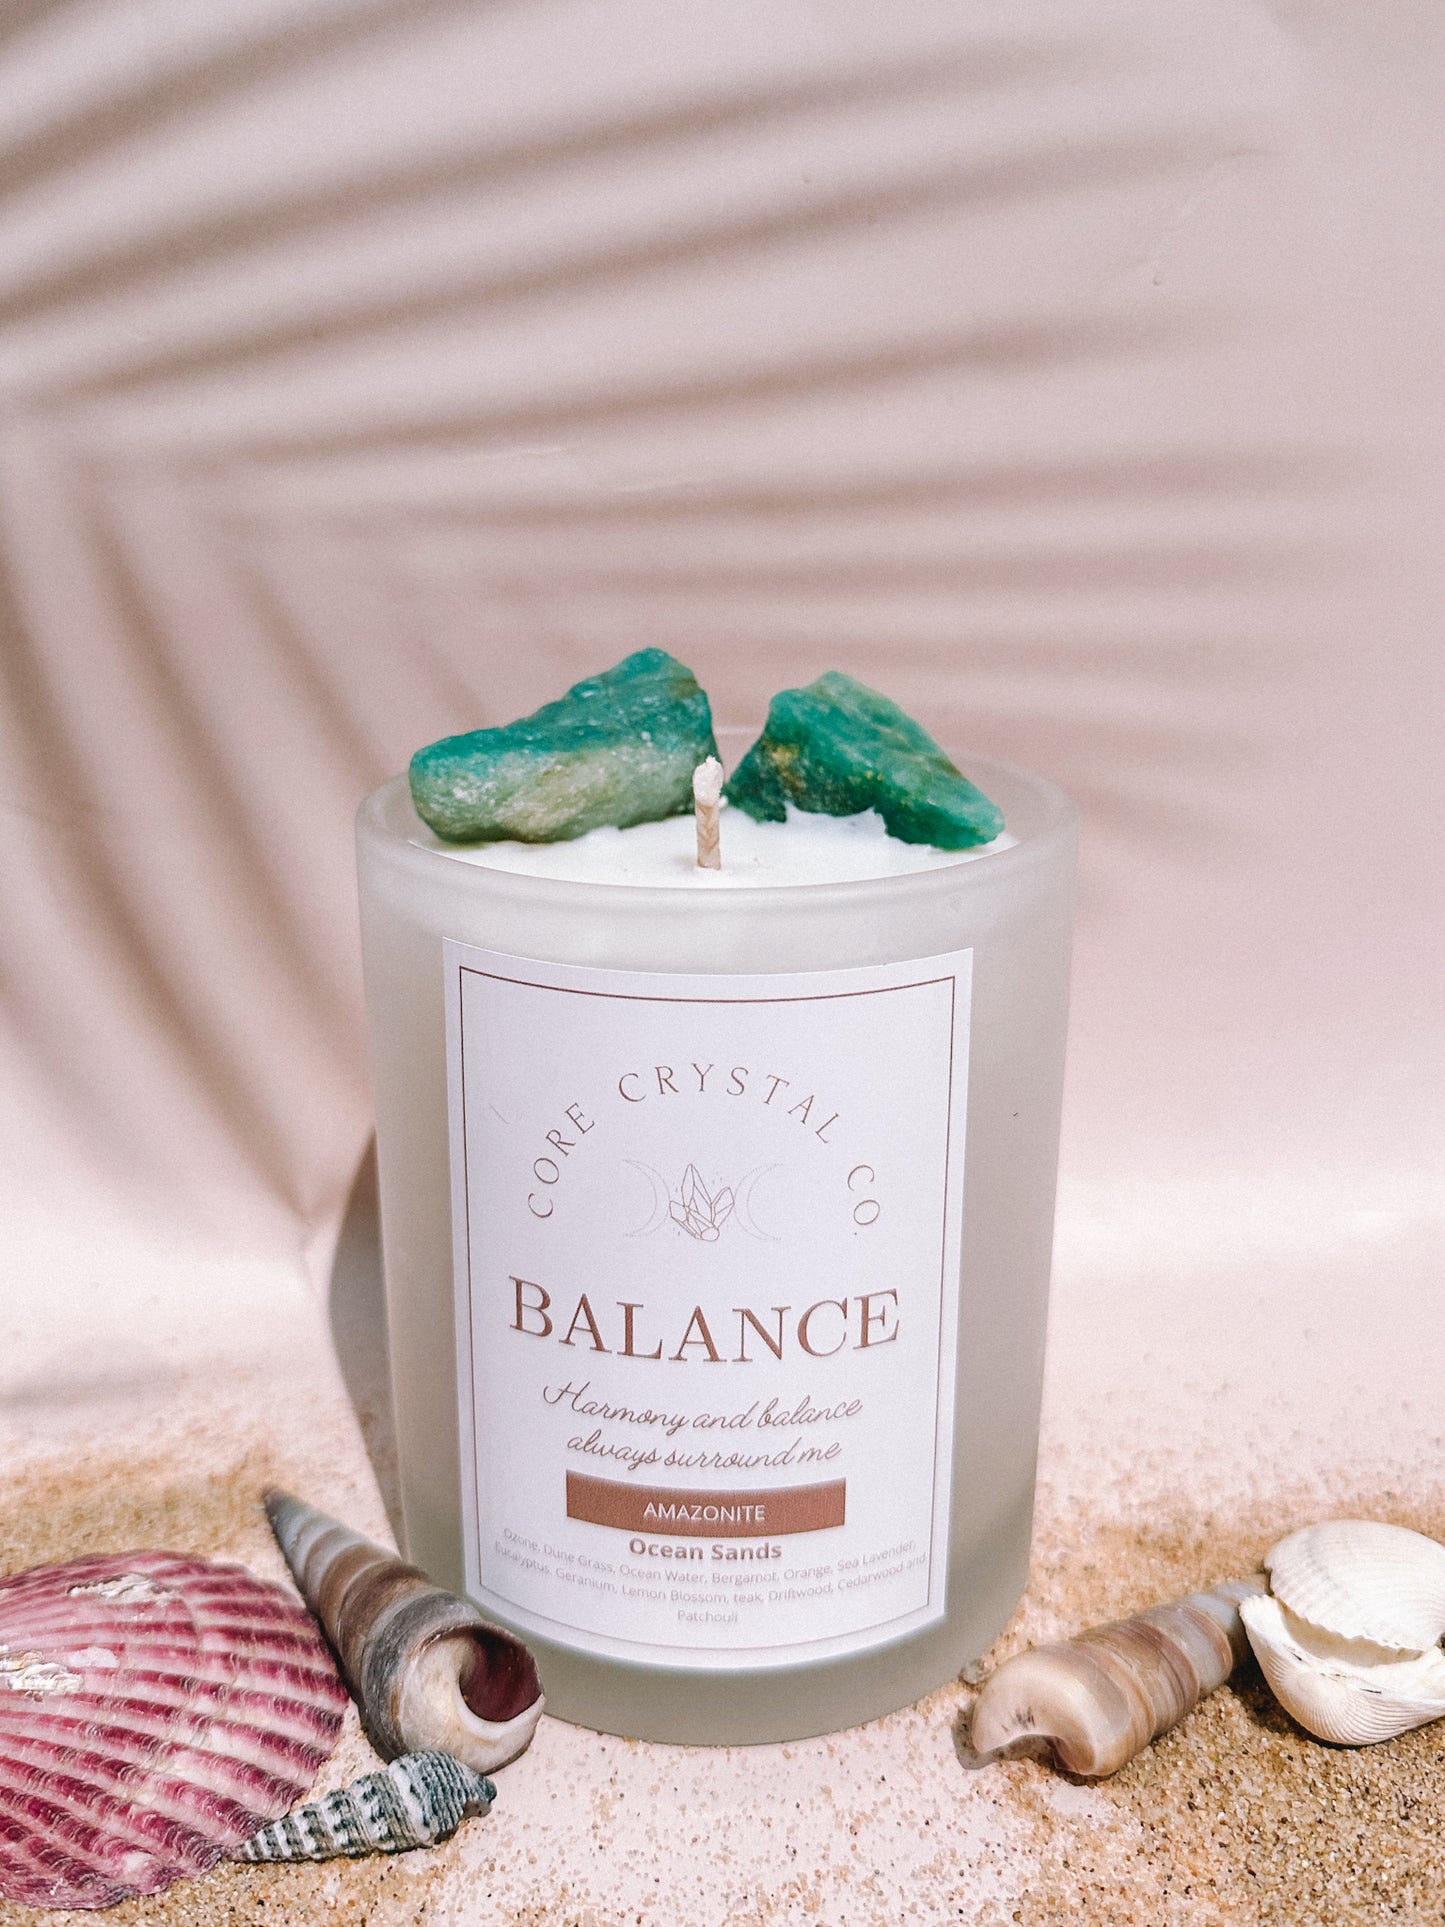 BALANCE Ocean Sands Amazonite Crystal Infused Candle